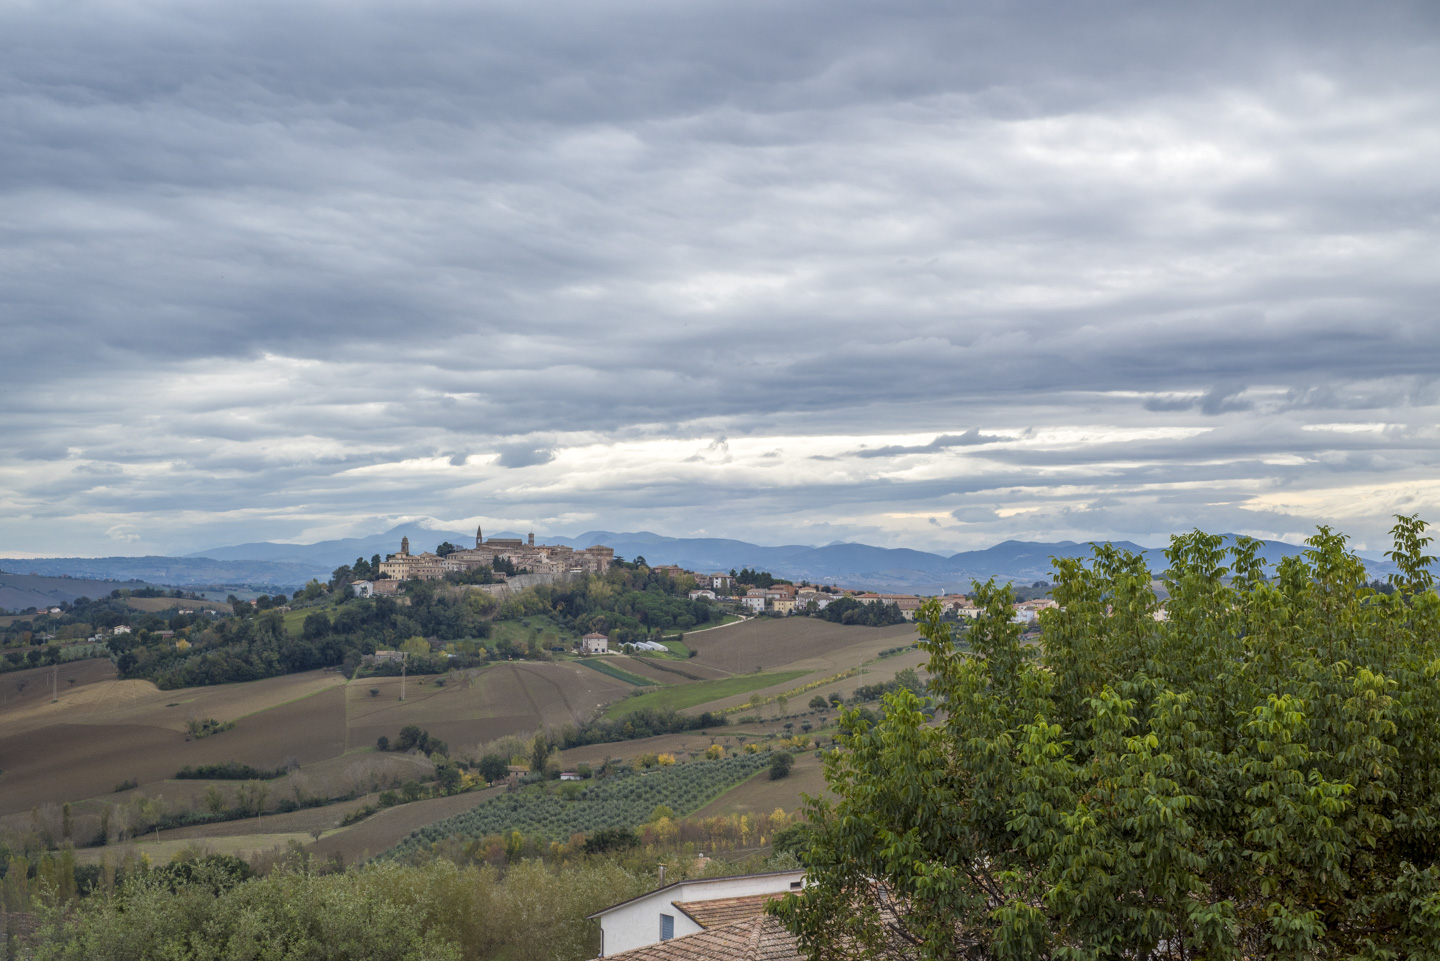 View from Orciano di Pesaro